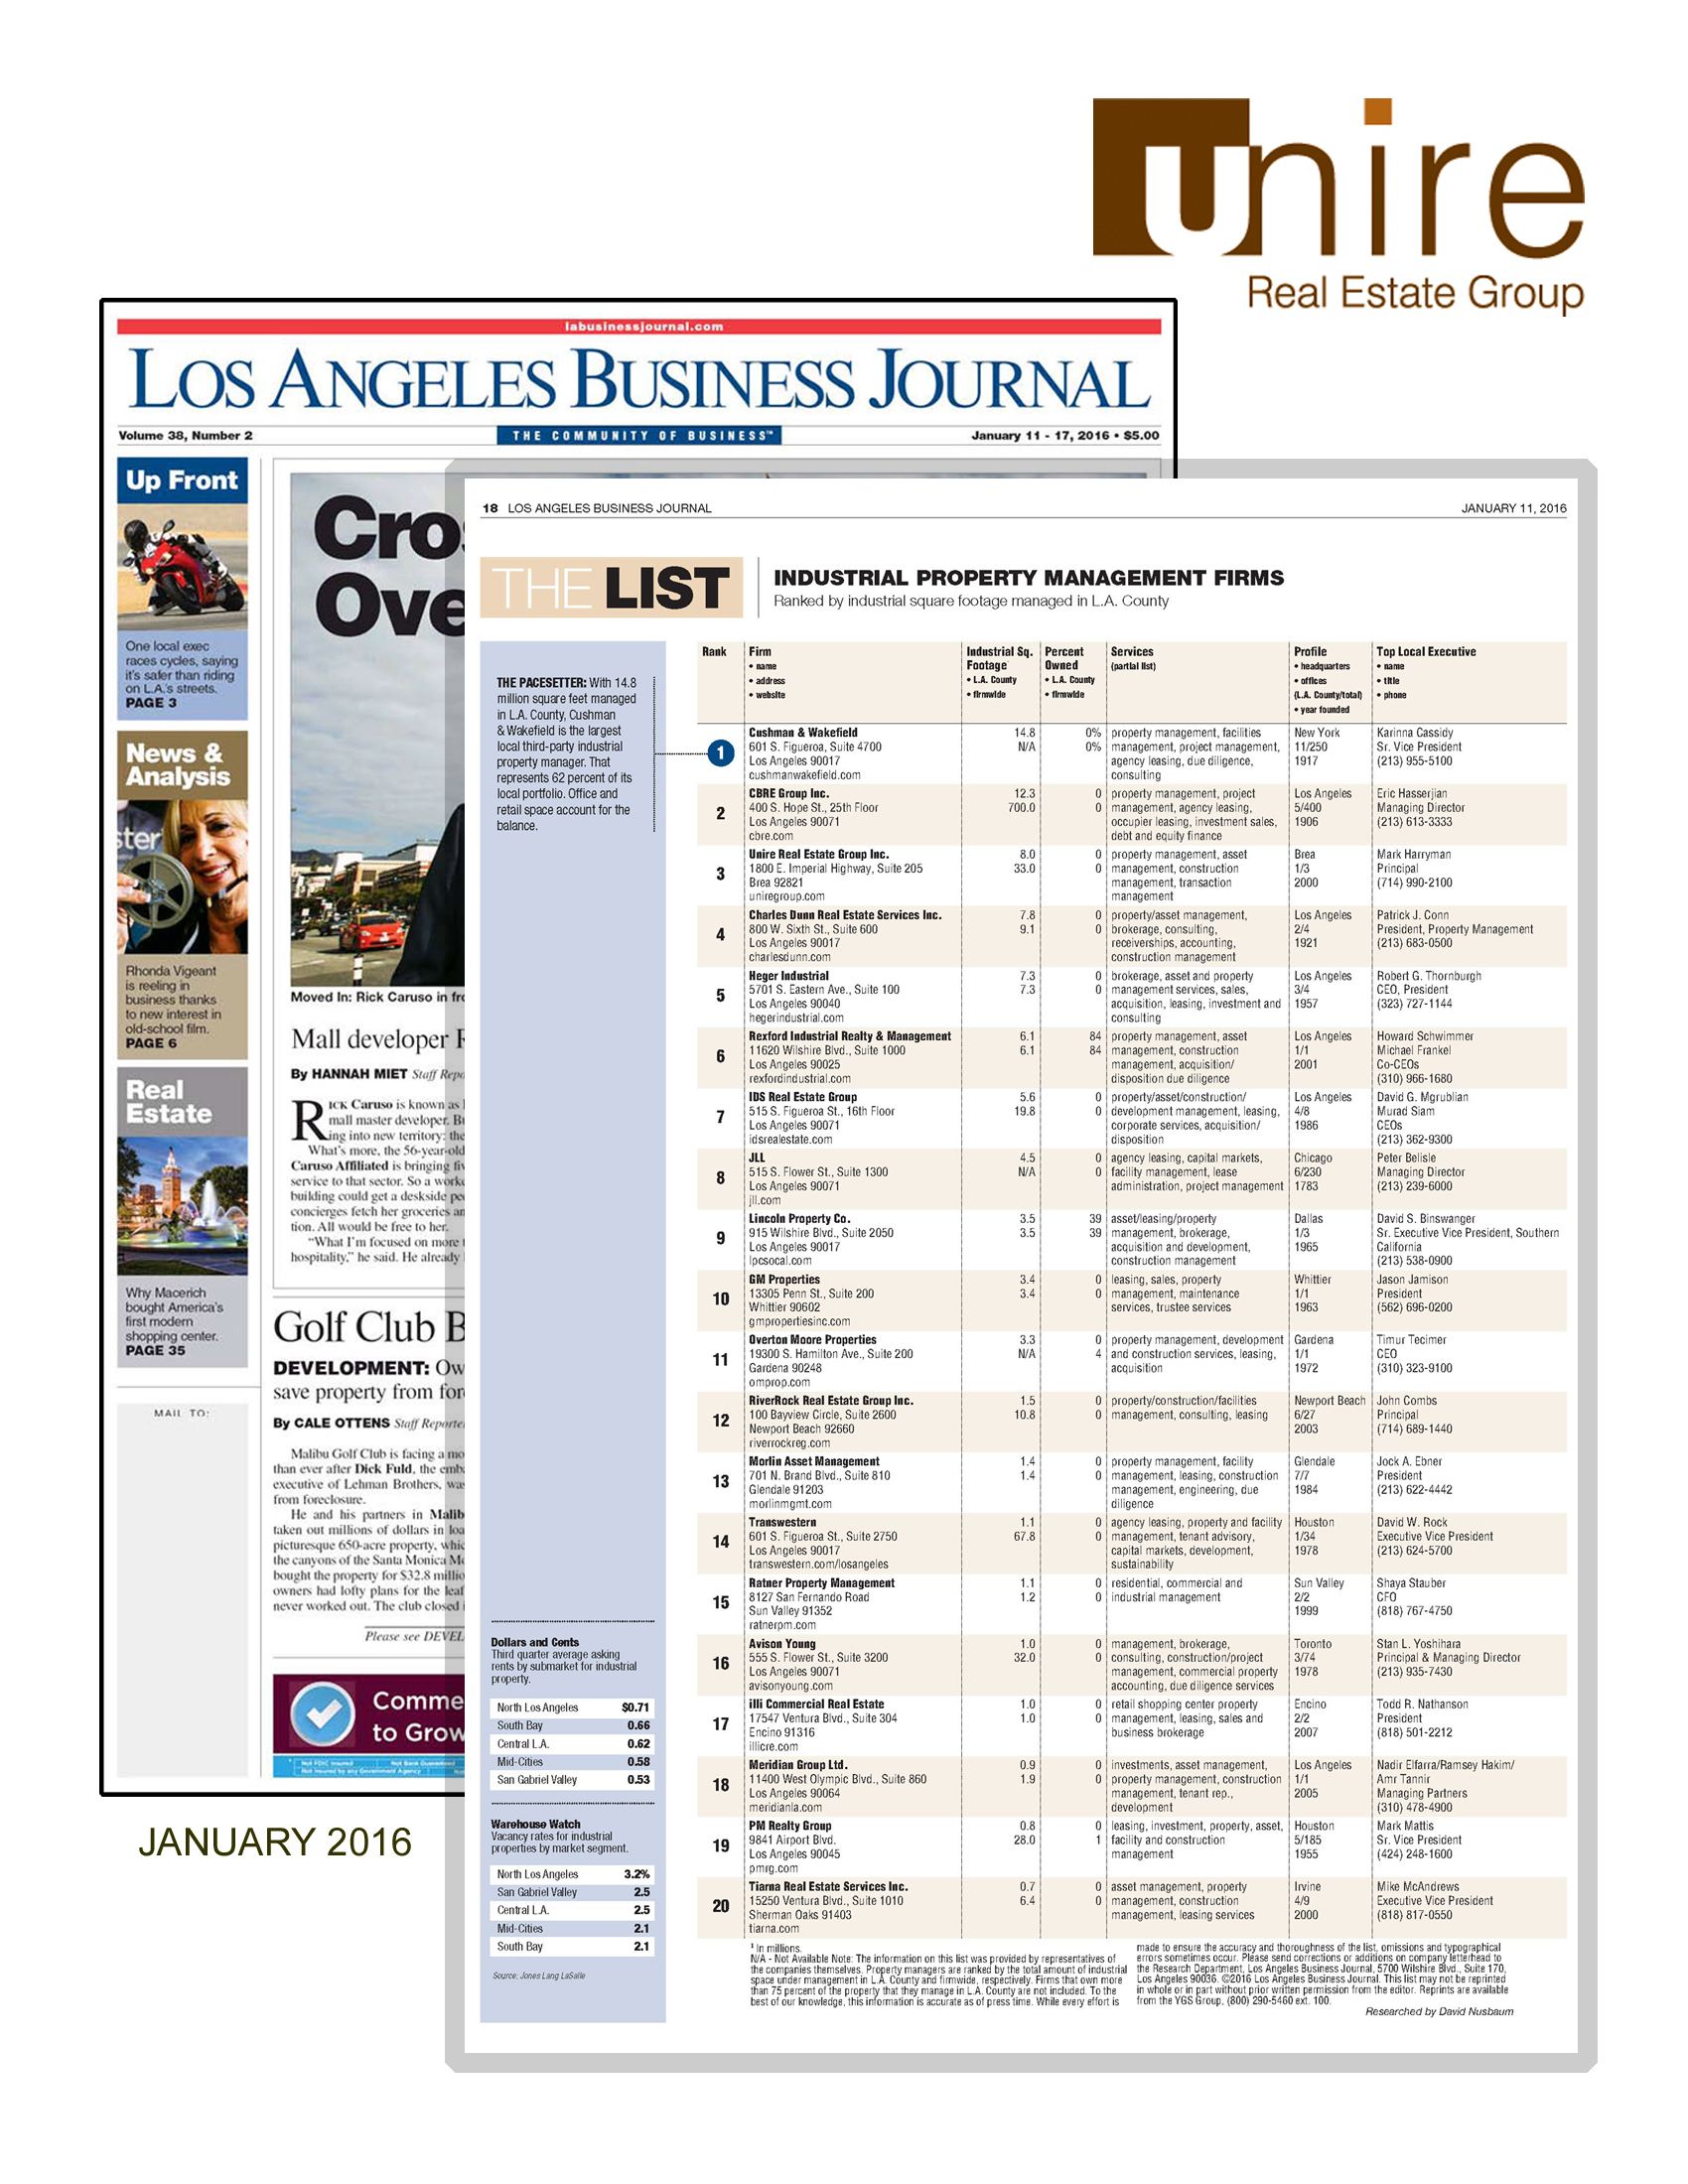 Los Angeles Business Journal names Unire Group to The List